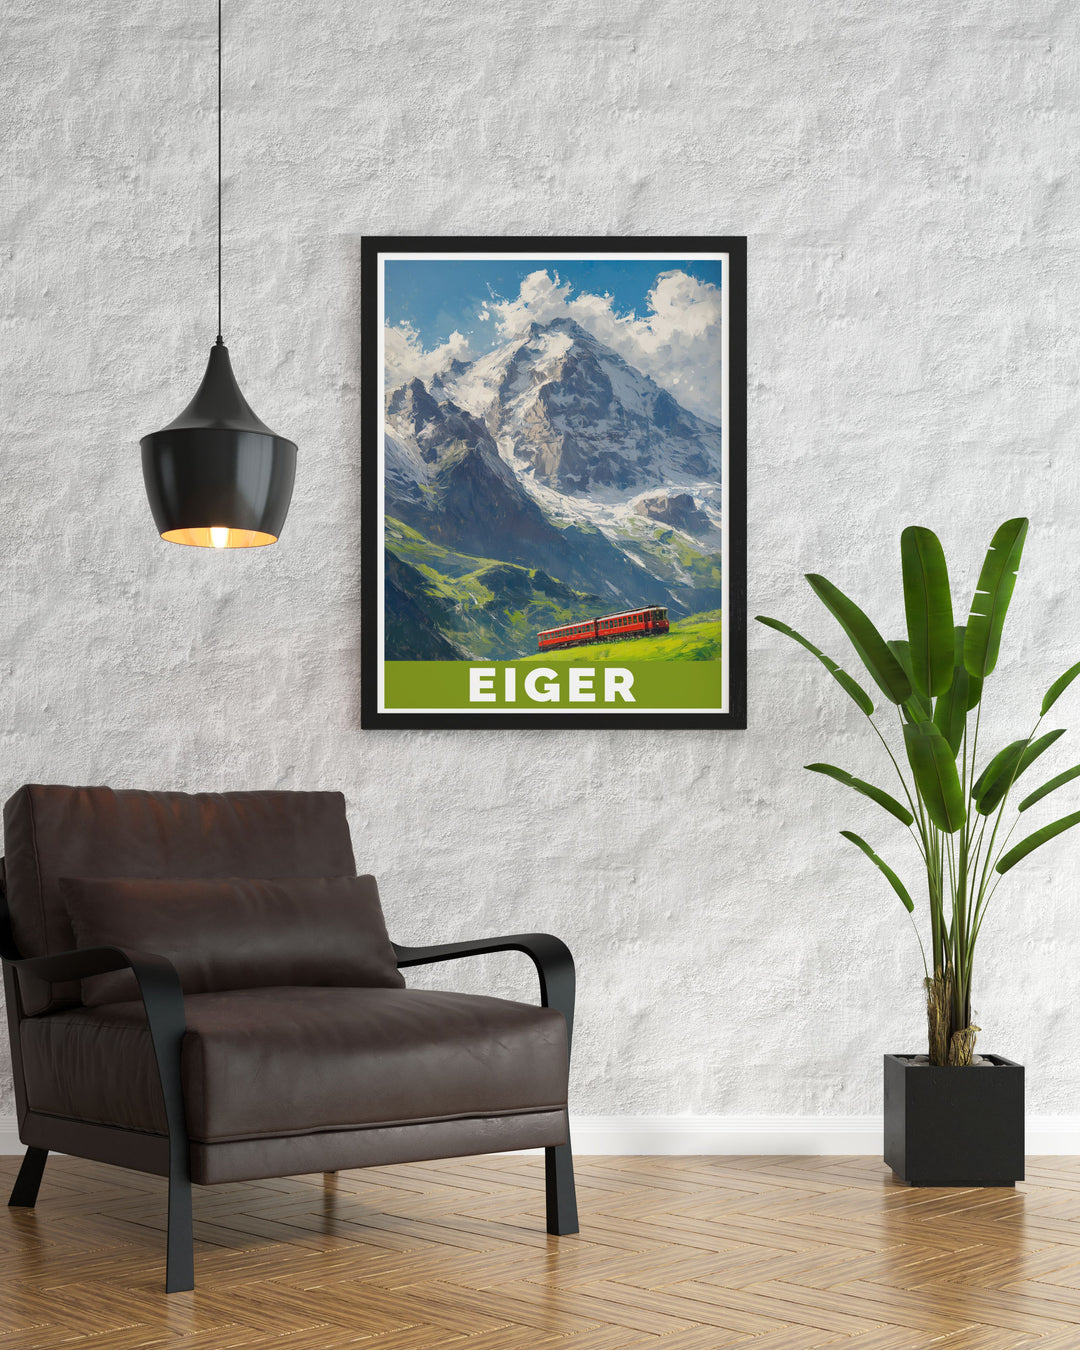 Beautiful poster of Eiger and Lauterbrunnen Valley showcasing the lush greenery and waterfalls of this picturesque region in Switzerland an ideal addition to any nature lovers collection of travel prints and wall art.